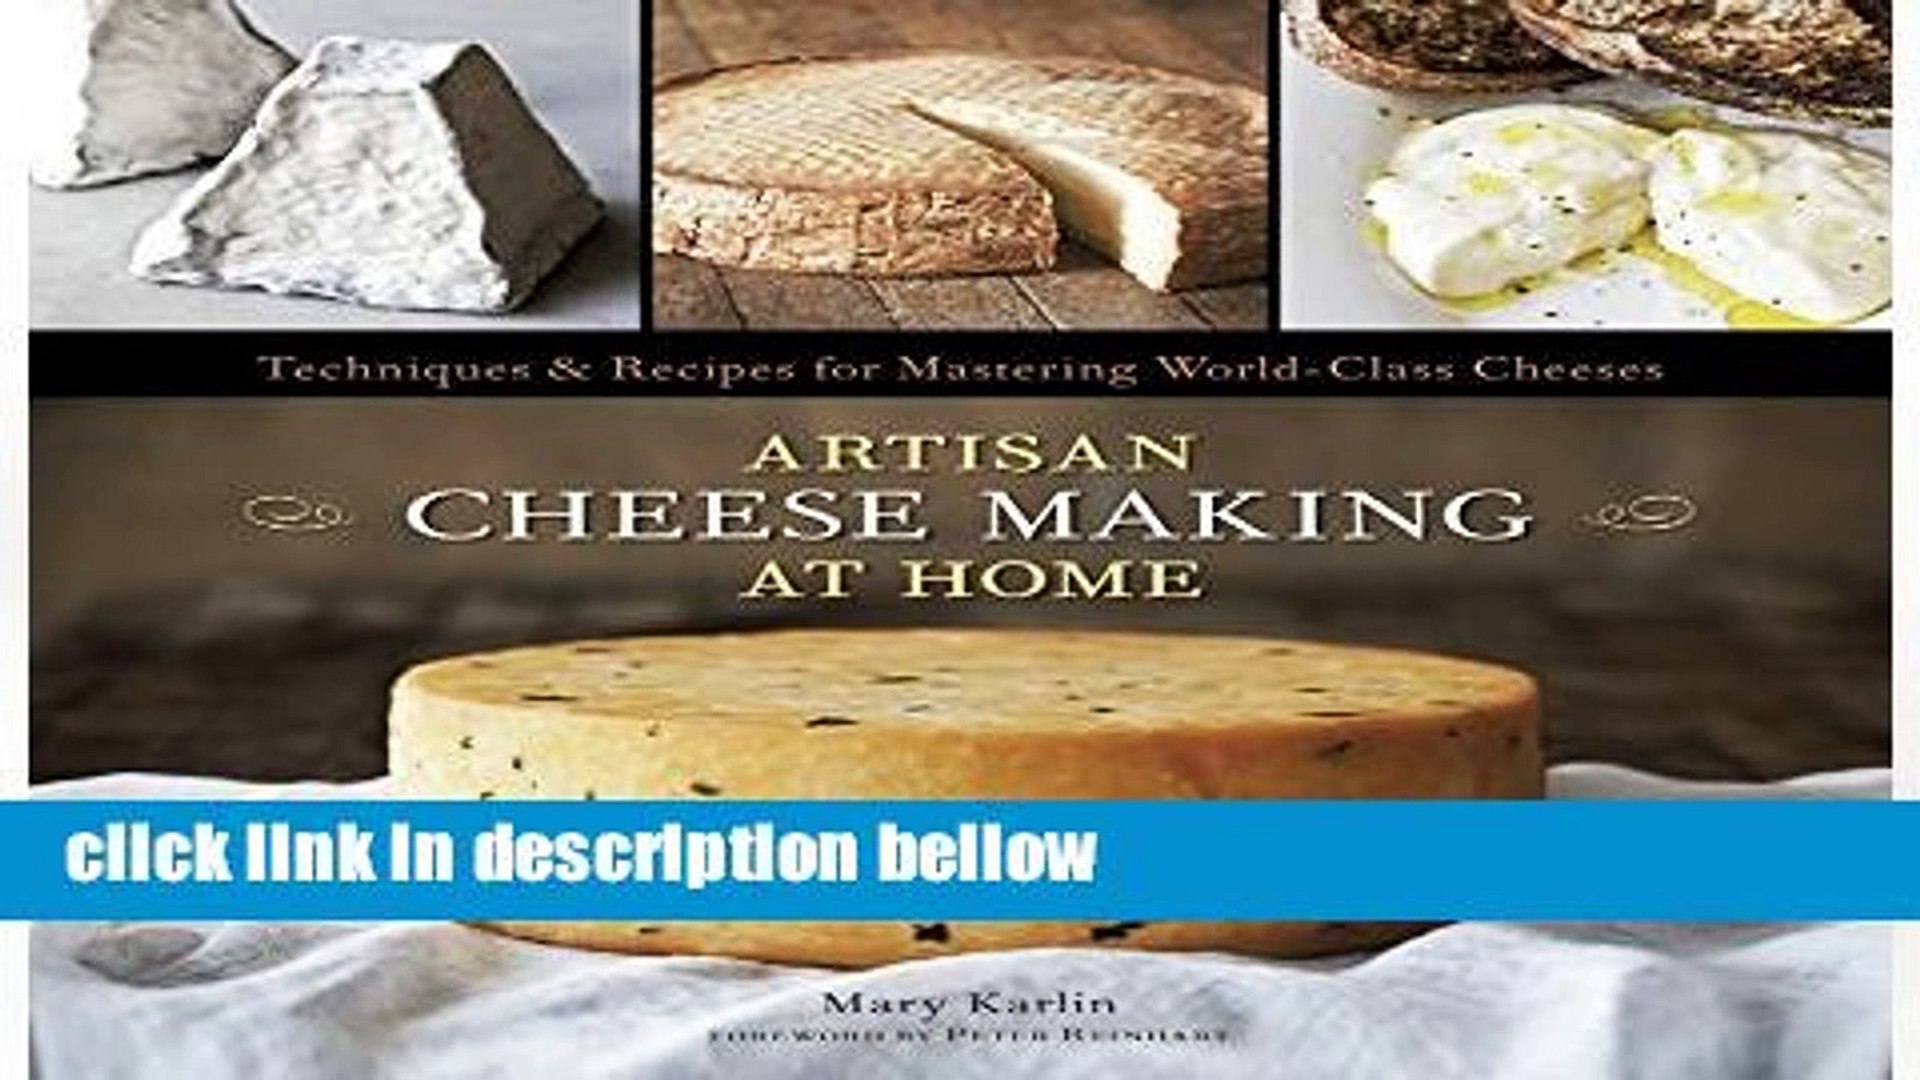 Techniques /& Recipes for Mastering World-Class Cheeses Artisan Cheese Making at Home